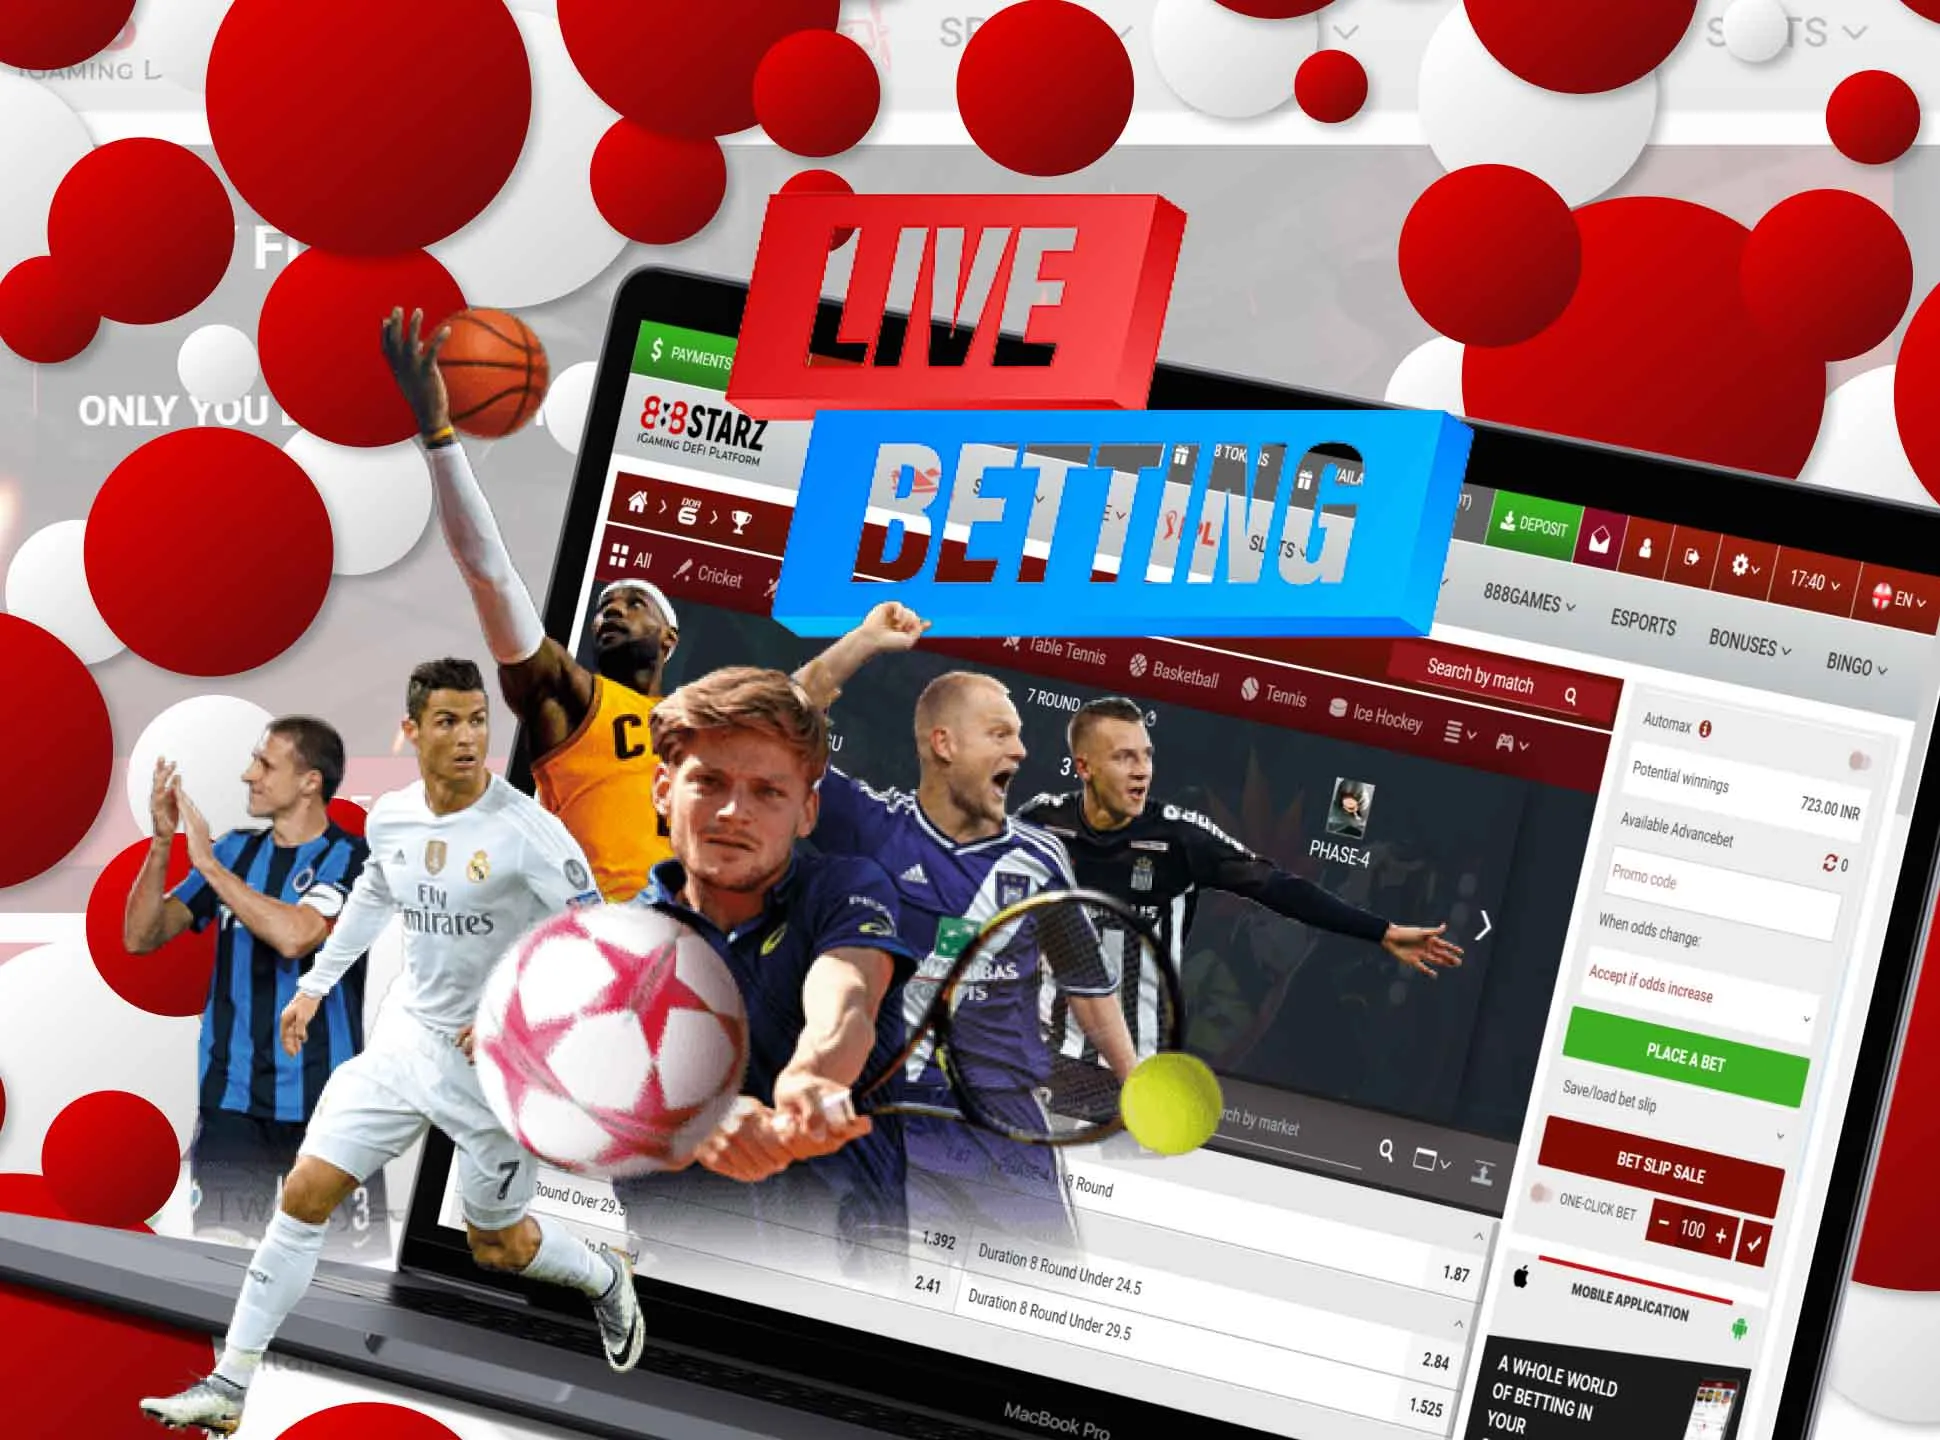 In the live betting section you can place bets during the matches.